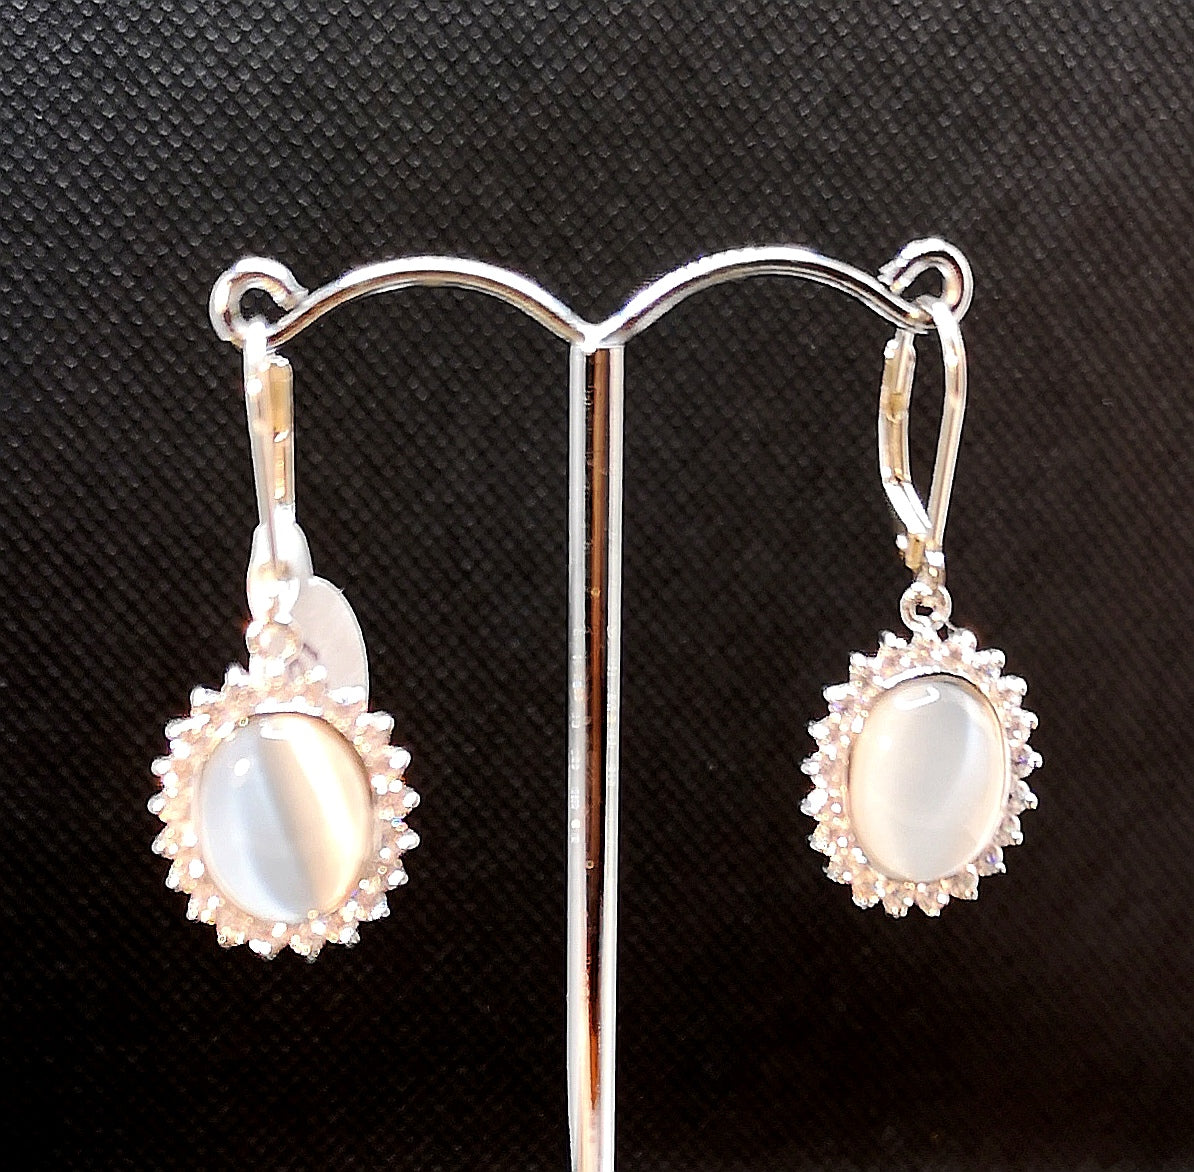 Faux moonstone earring in sterling silver with rhodium finish and cubic.surrounded by micro set cubic